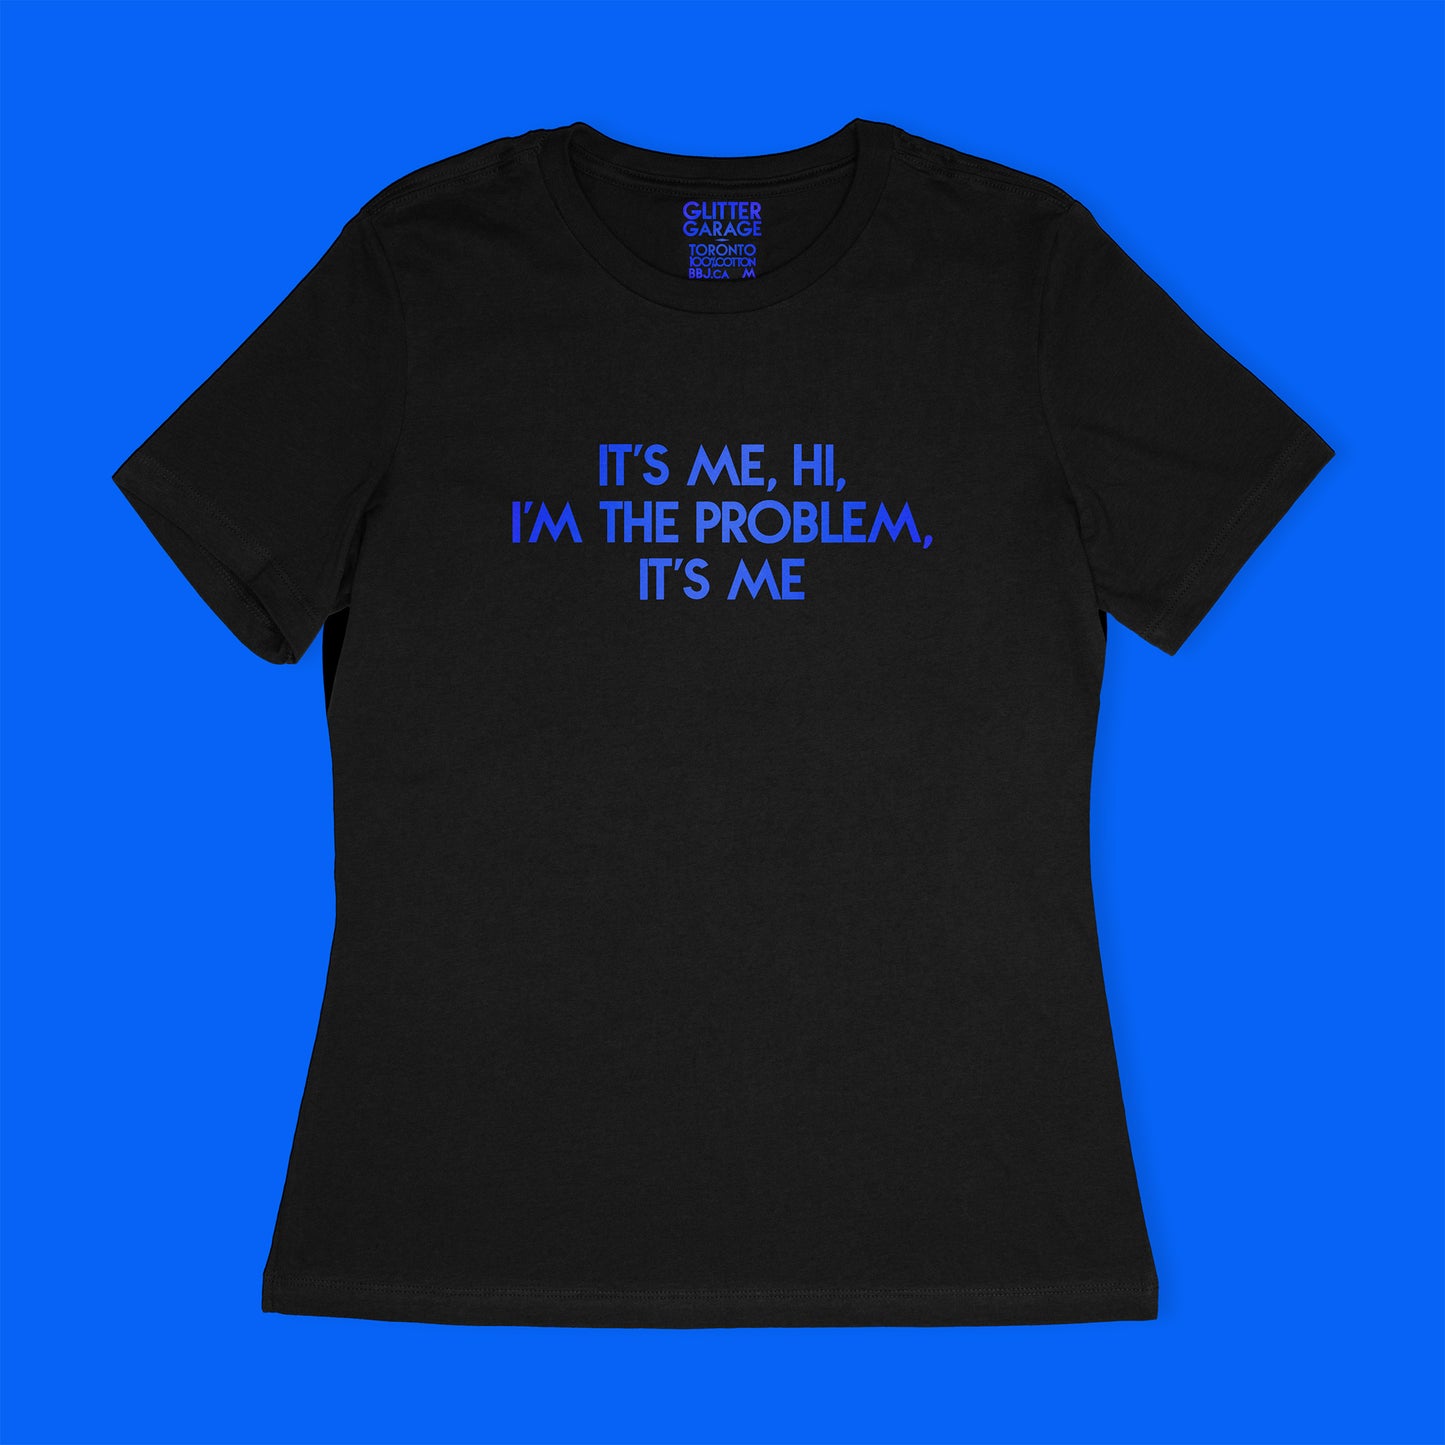 Custom text tee - with "It's Me, Hi..." in blue metallic text - USE YOUR WORDS - Black women's relaxed fit cotton t-shirt  by BBJ / Glitter Garage